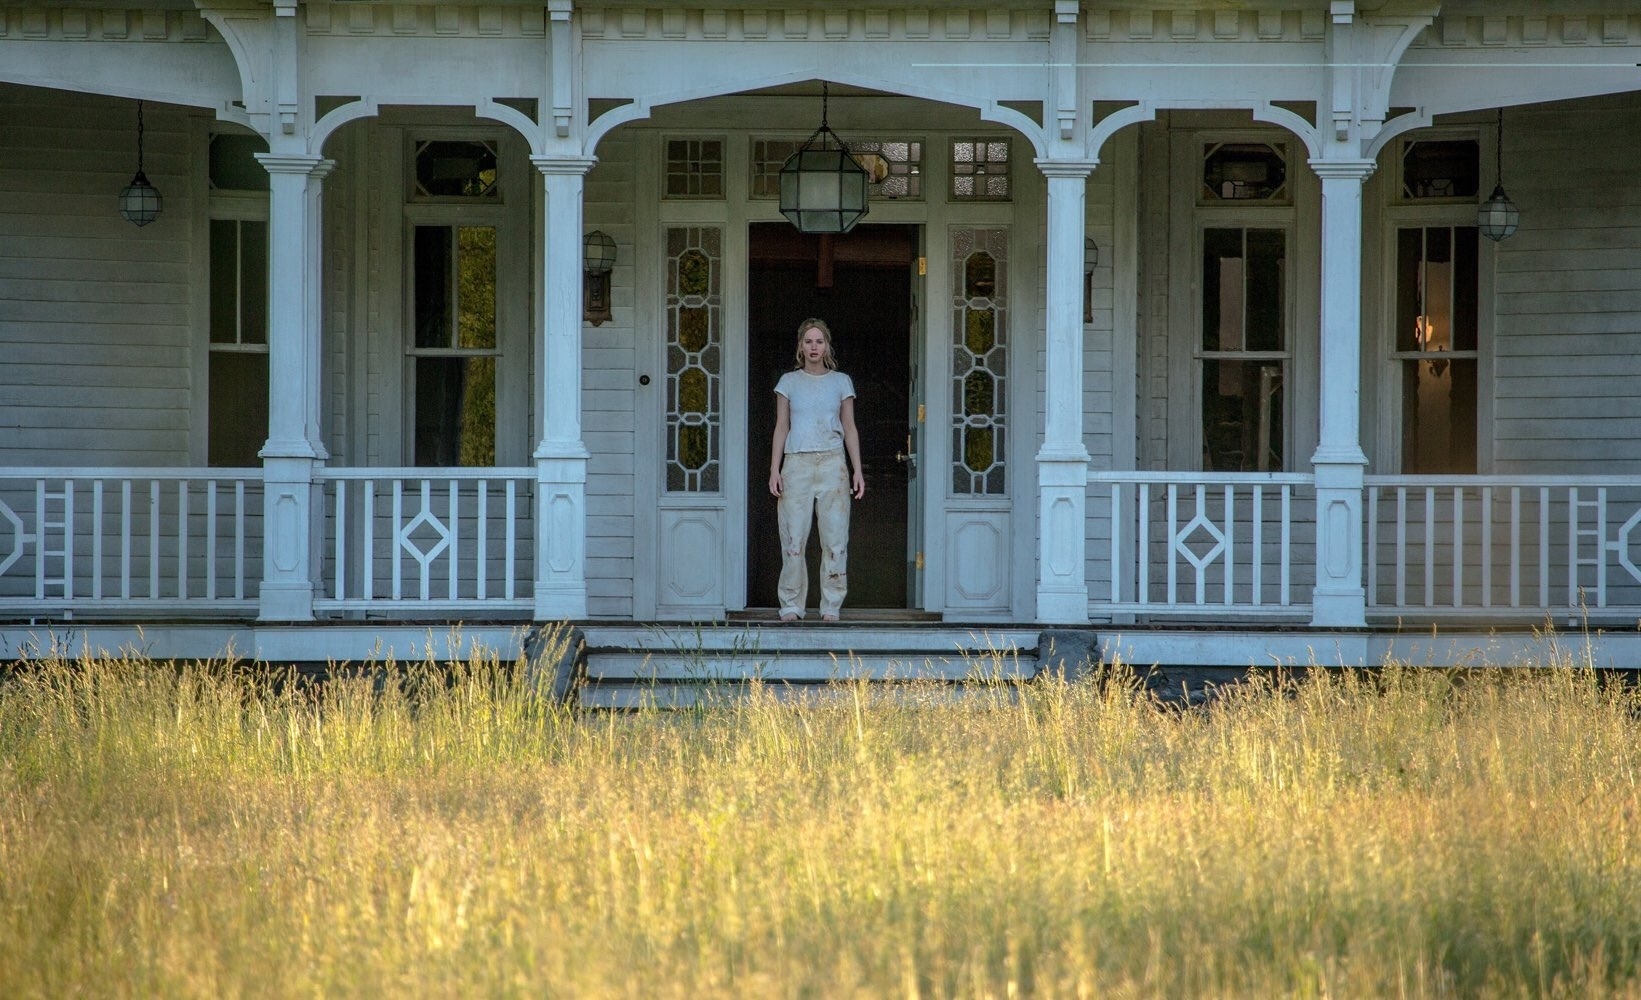 Jennifer Lawrence standing on the front porch of a large house.